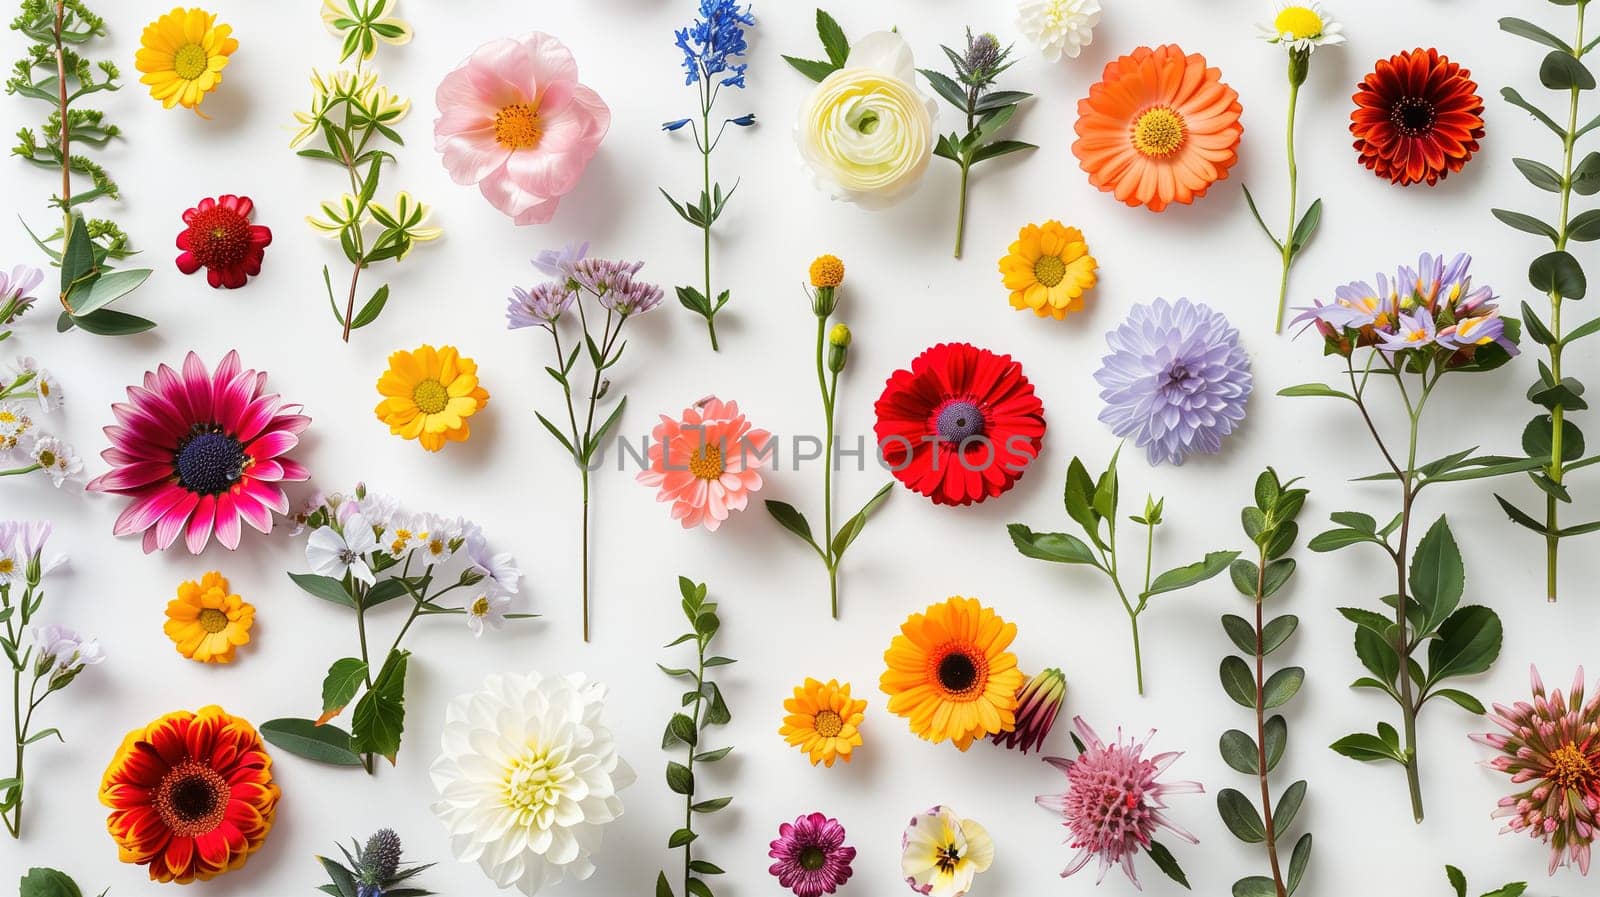 A variety of vibrant colored flowers scattered across a clean white surface, showcasing a range of hues and shapes in a festive display for an International Mothers Day concert.